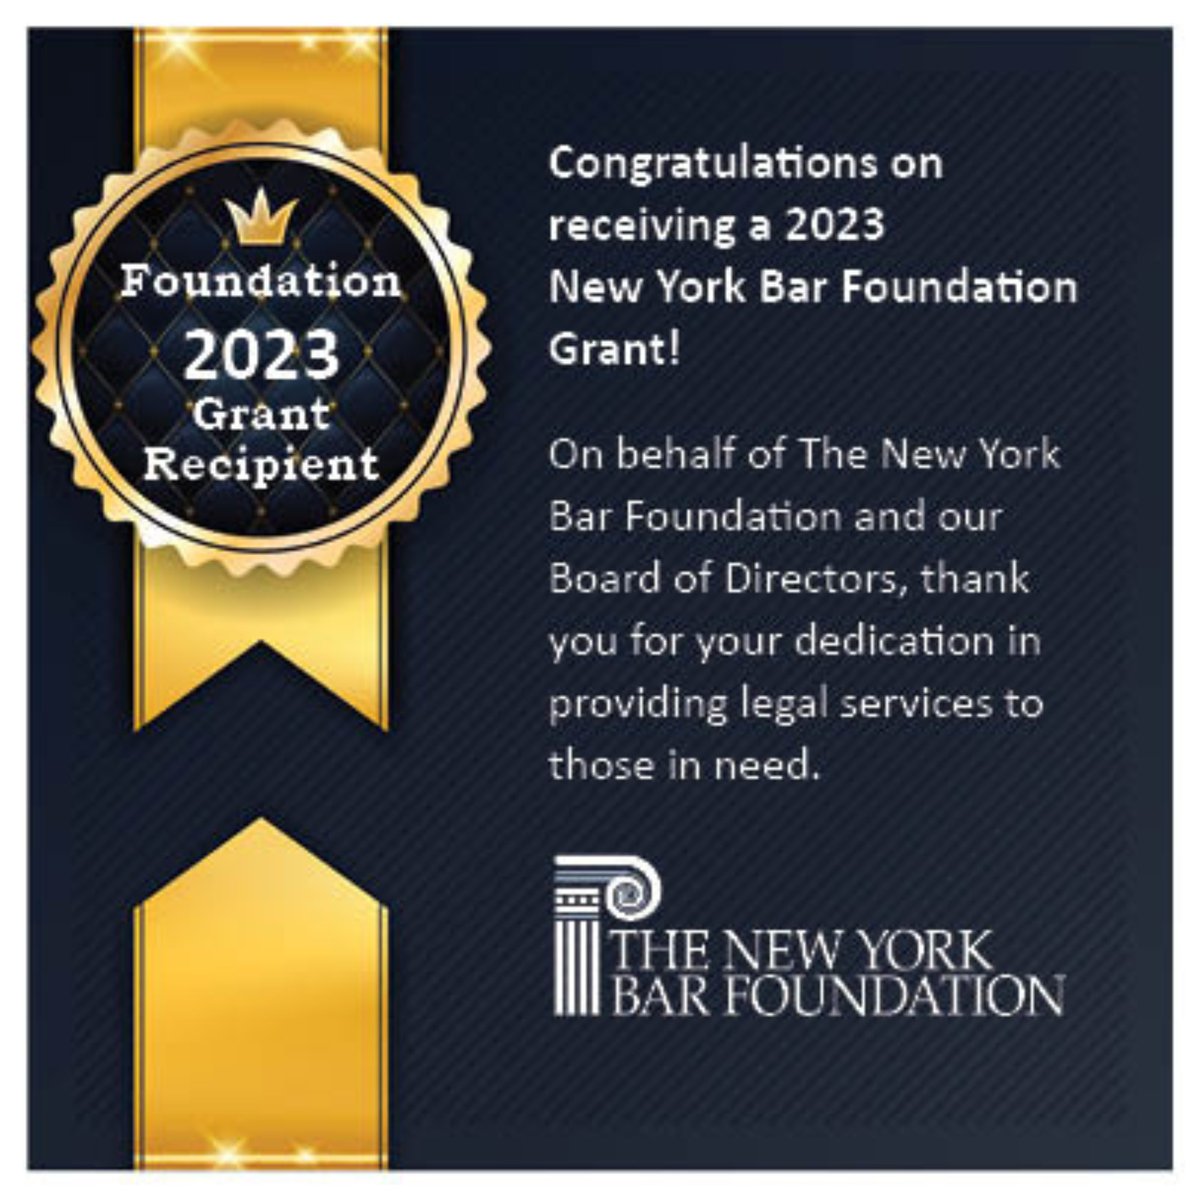 We're pleased to share the news that NMIC is the recipient of a 2023 New York Bar Foundation grant!

@nybarfoundation, thank you for supporting legal services at NMIC!

#UptownNY #WashingtonHeightsNYC #AltoManhattan #LittleDominicanRepublic #LittleDR #MiLittleDR #UptownCollective